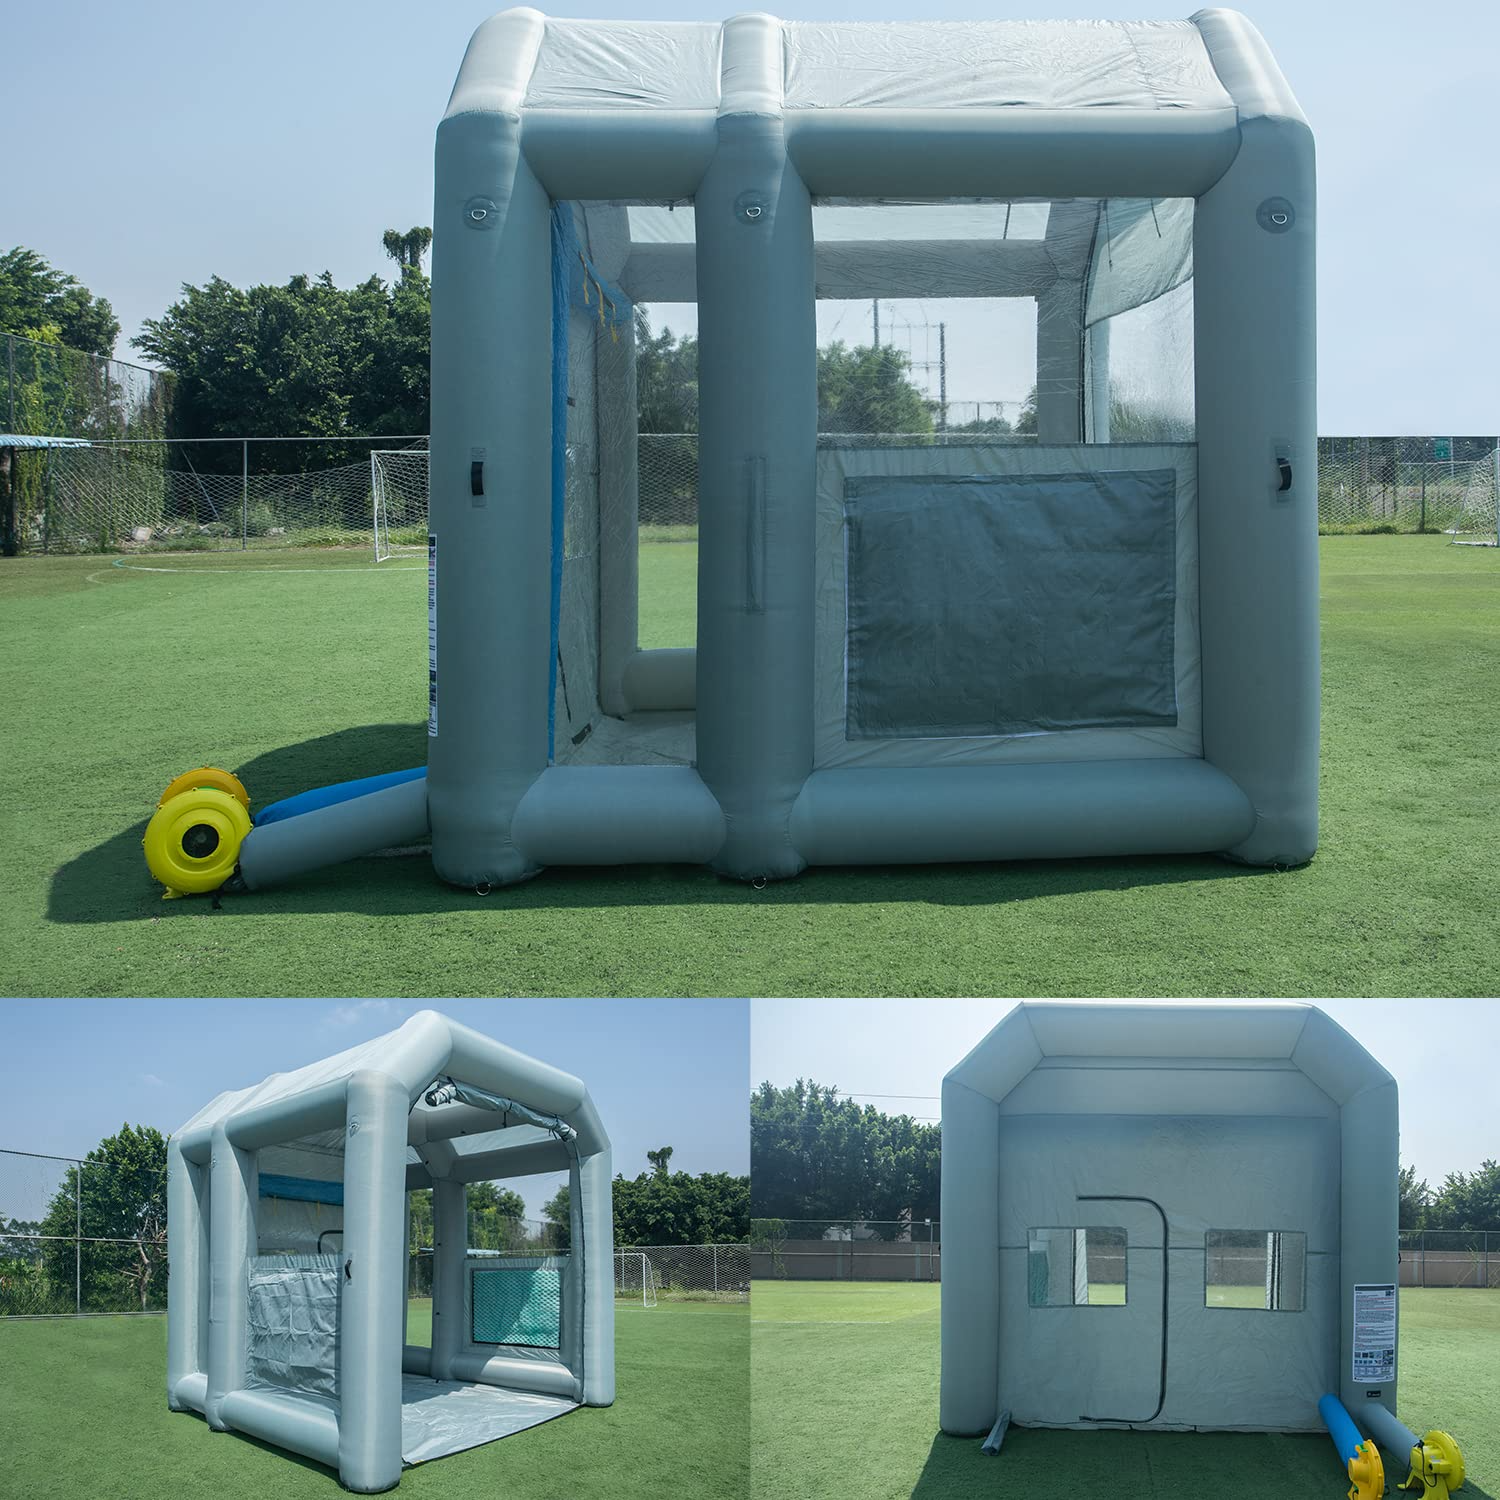 Sewinfla Professional Inflatable Paint Booth 12.5x11.2x11.2Ft with 2 Blowers (480W+750W) & Air Filter System Portable Paint Booth Tent Garage Inflatable Spray Booth Painting for Parts,Motorcycles